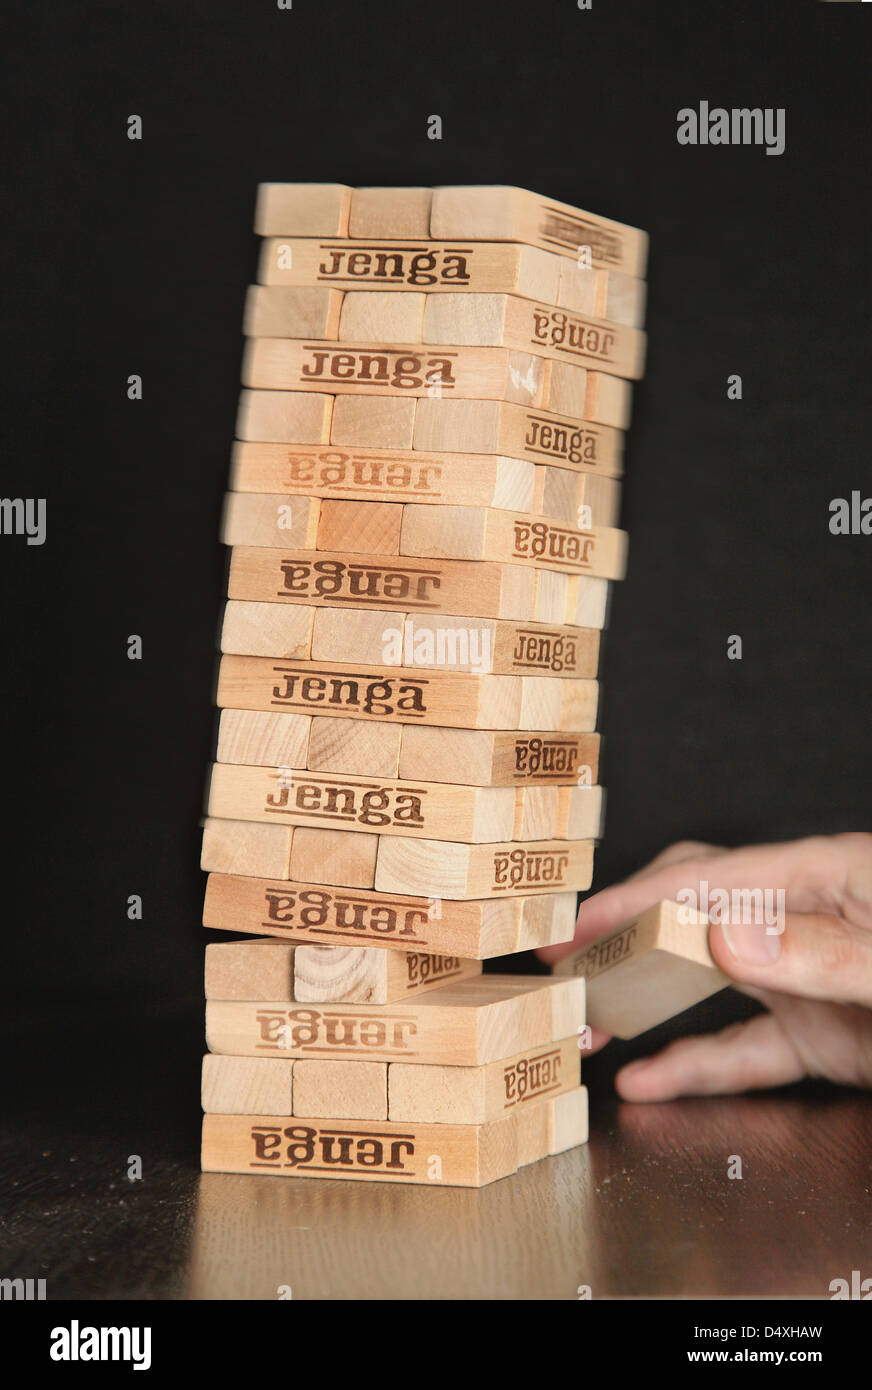 The game of Jenga. The tower of brick blocks collapses as one section is removed. Stock Photo